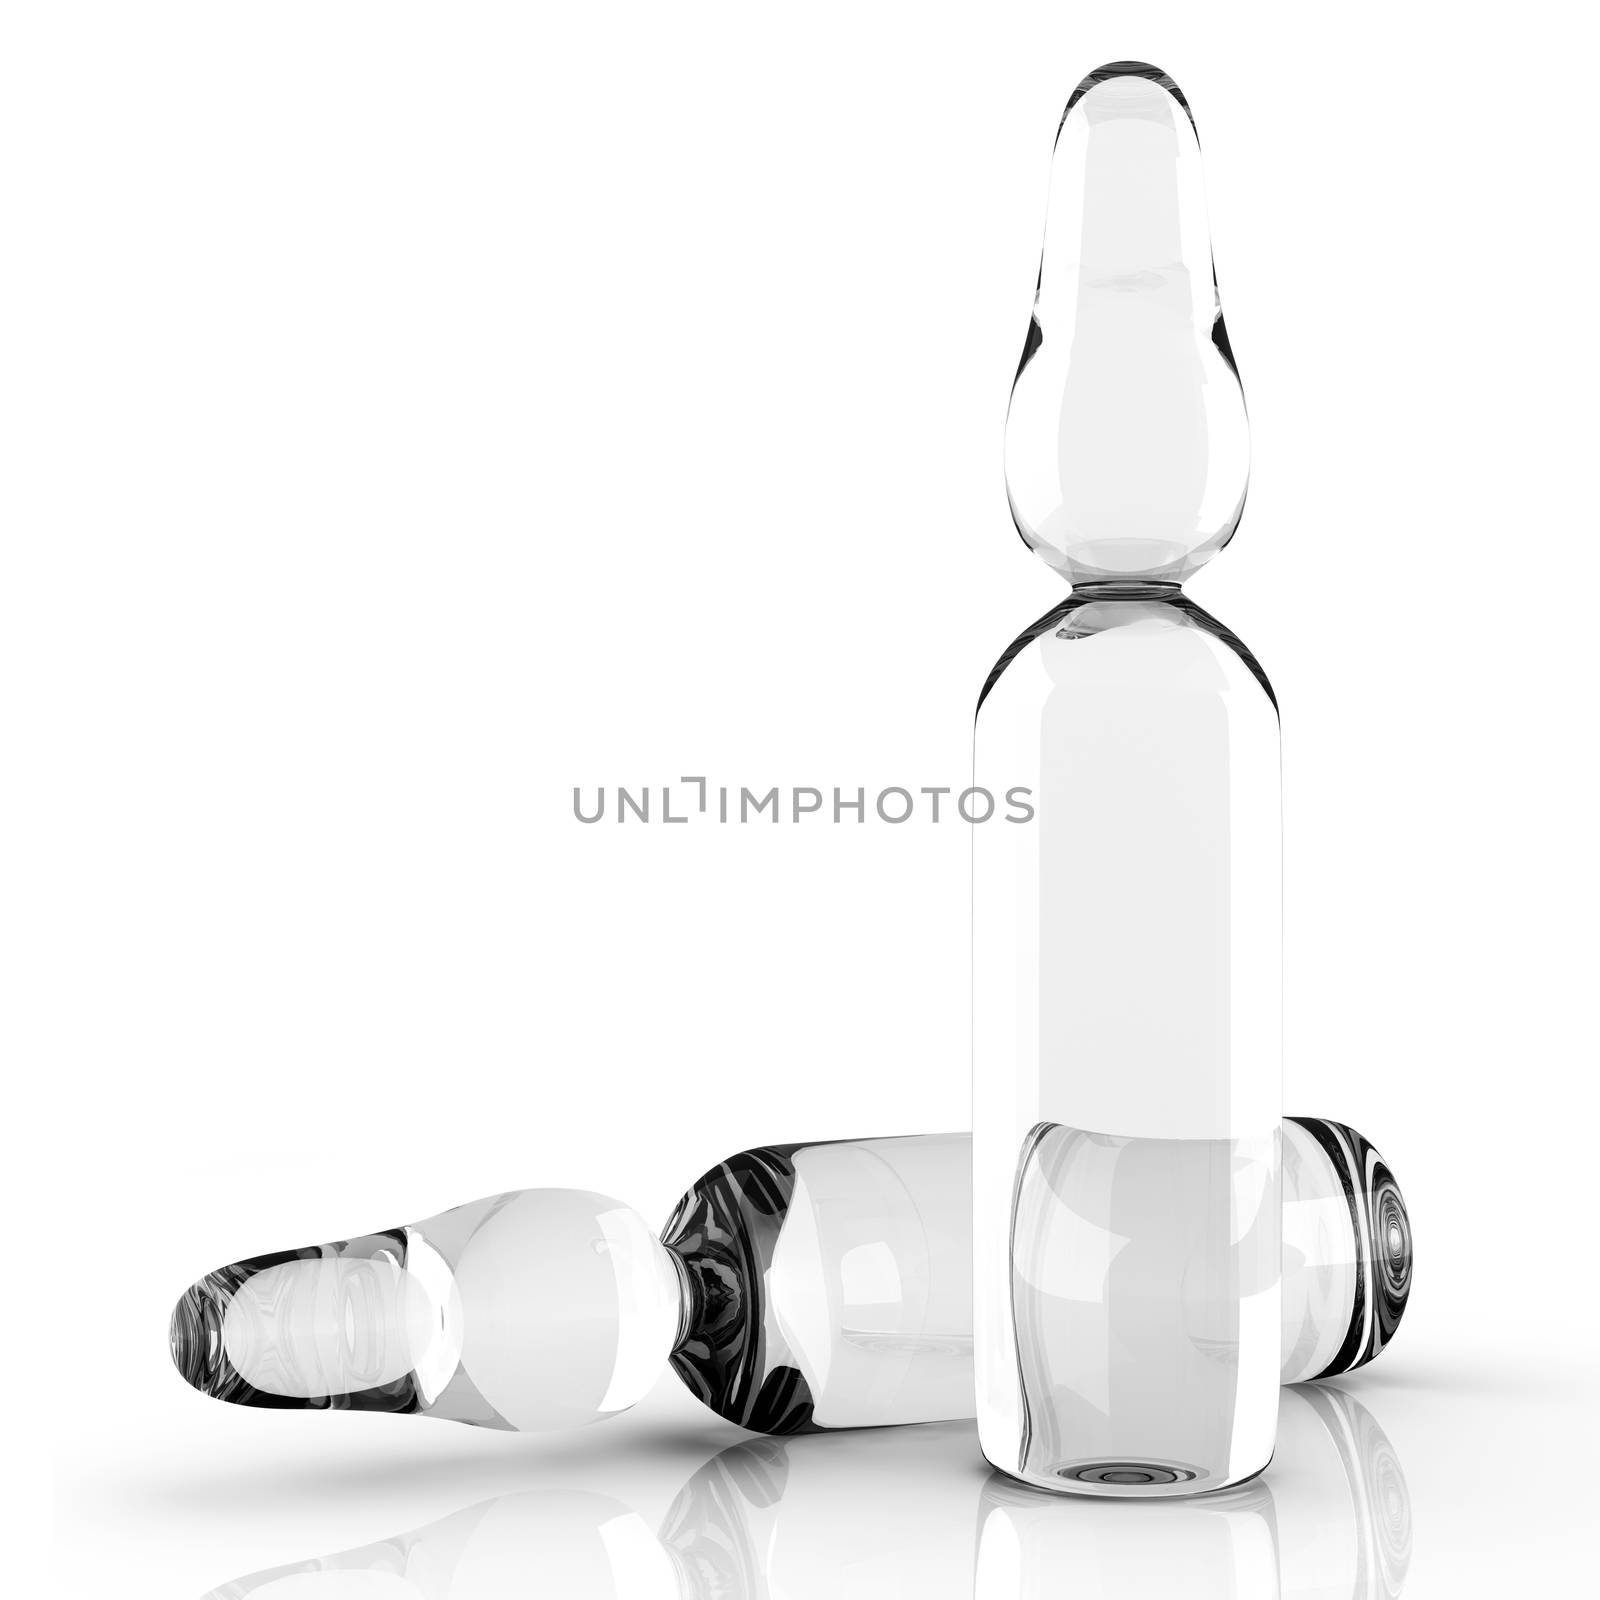 Some medical Ampules. 3D rendered illustration. Isolated on white.